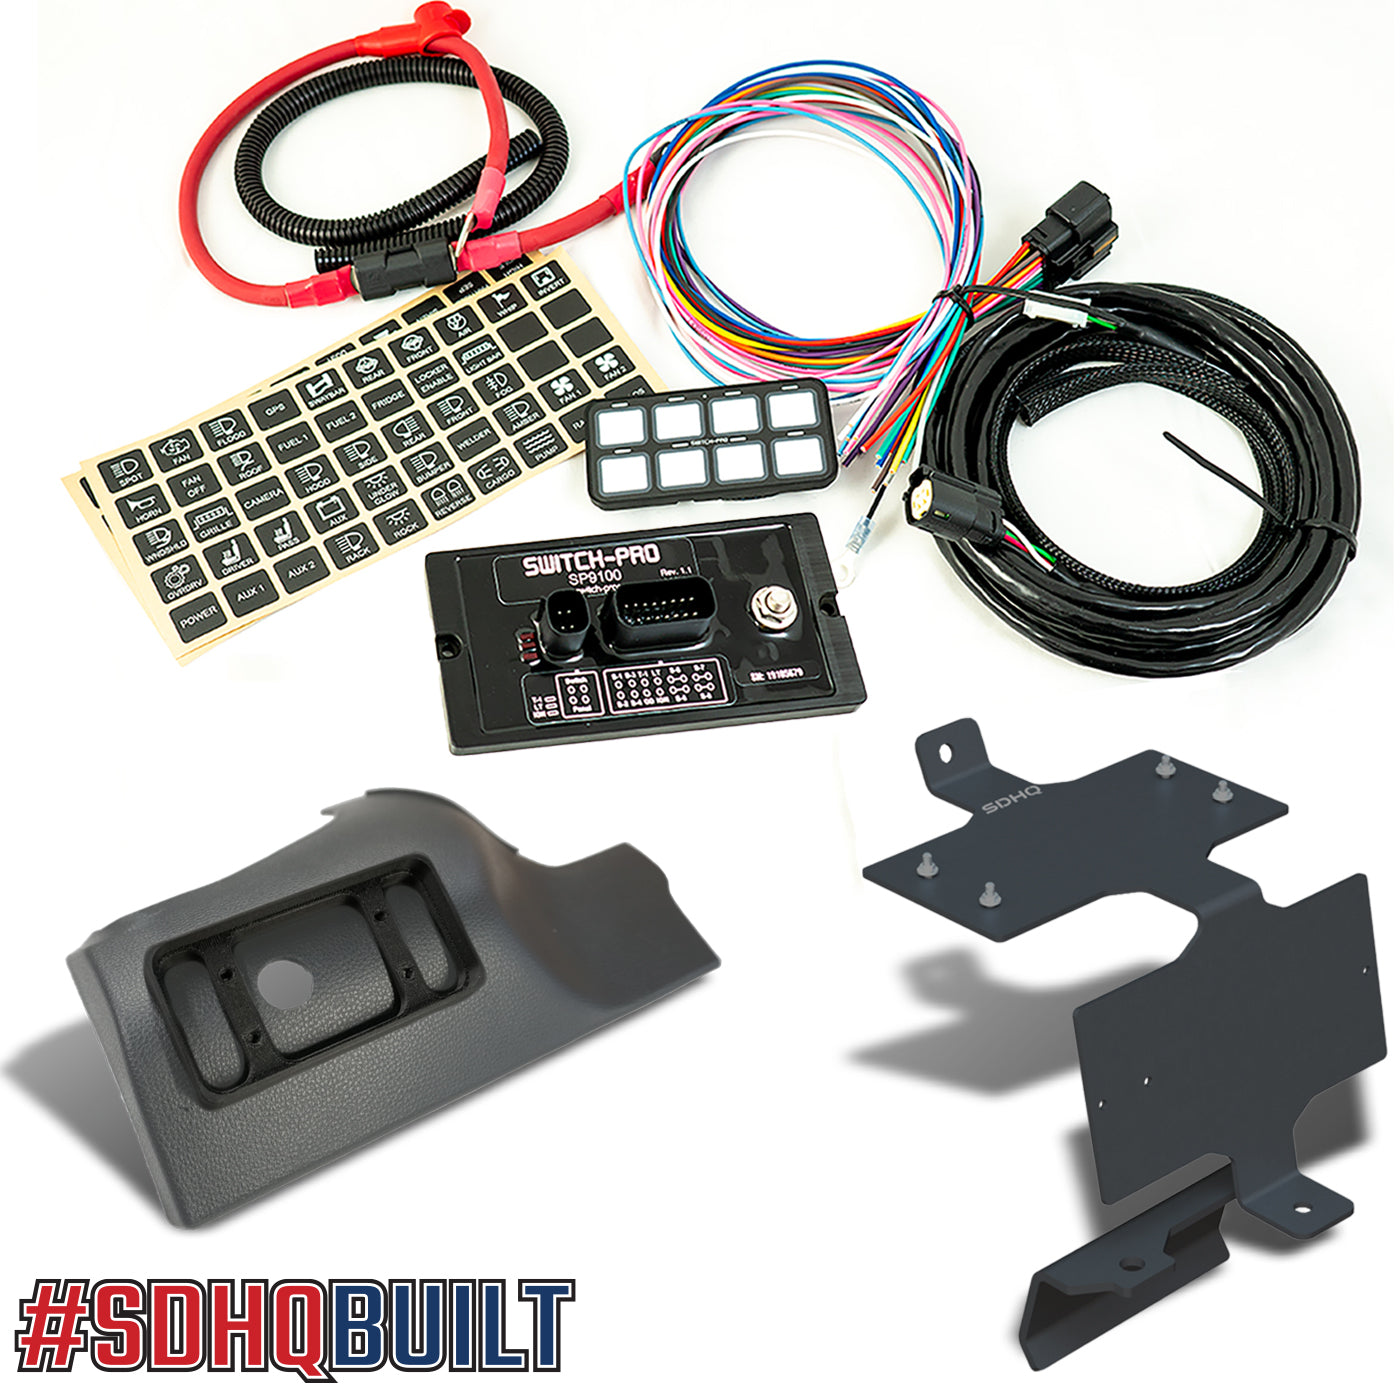 '22-23 Toyota Tundra SDHQ Built Complete Switch-Pros SP-9100 Mounting Kit